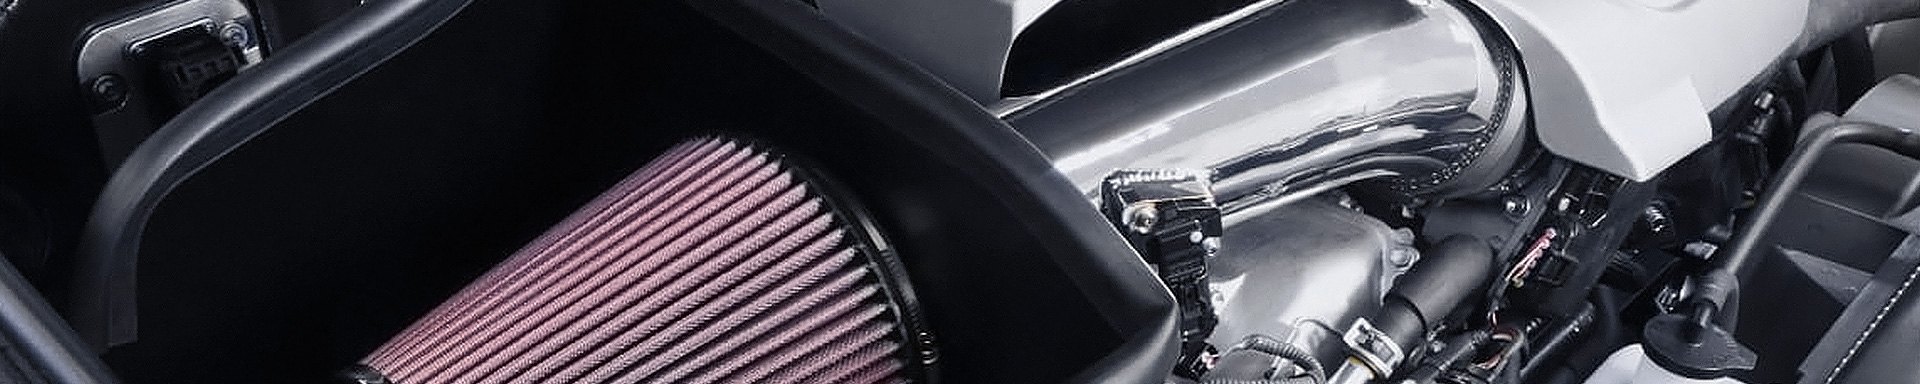 Help your Ford Truck Breathe Better with New Air Intake System by K&N